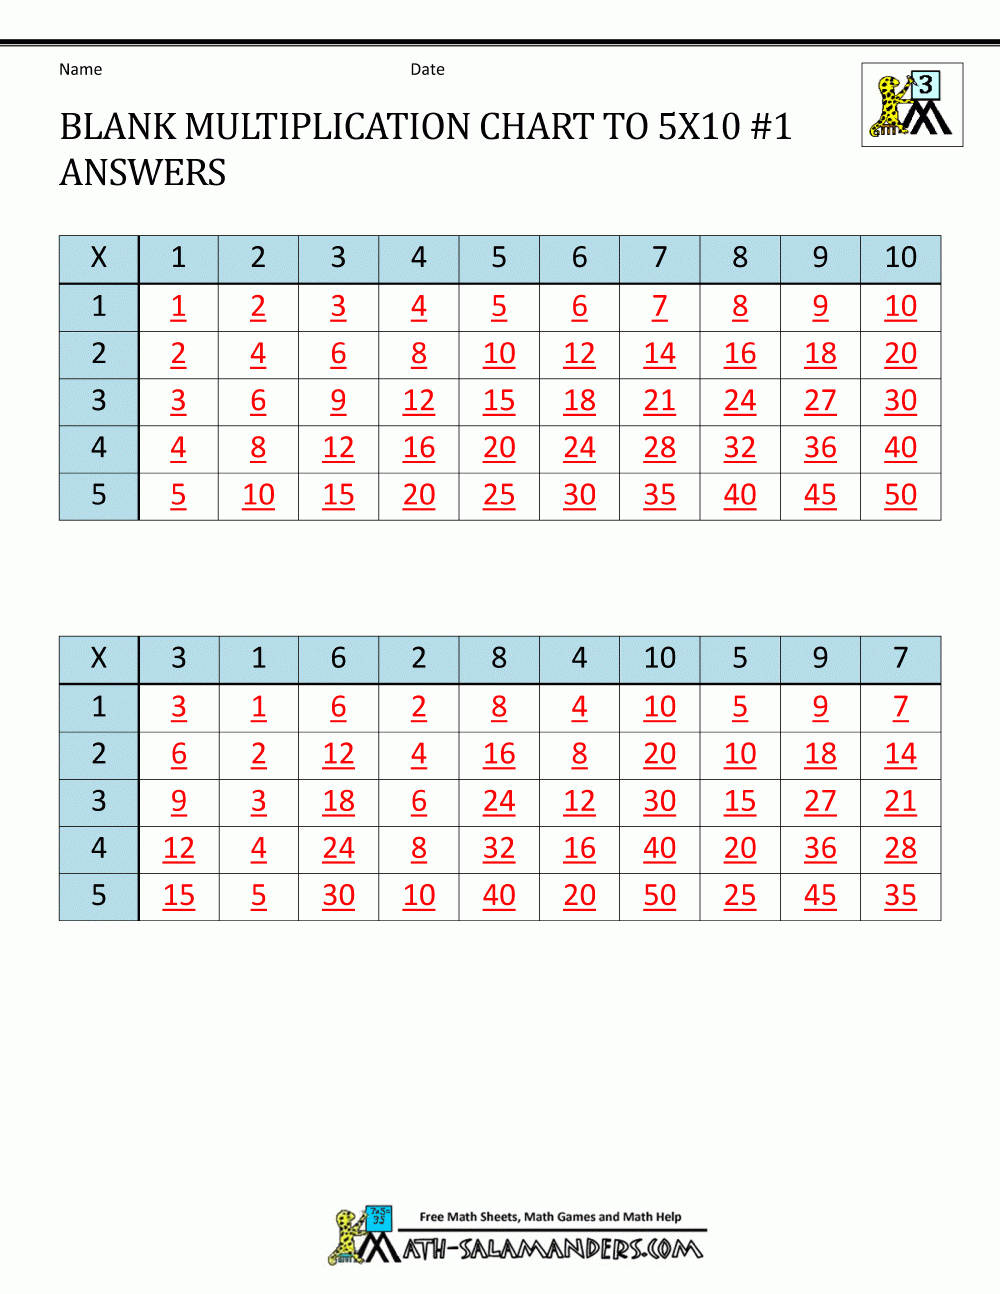 Blank Multiplication Chart Up To 10X10 intended for Printable Blank Multiplication Chart 1-10